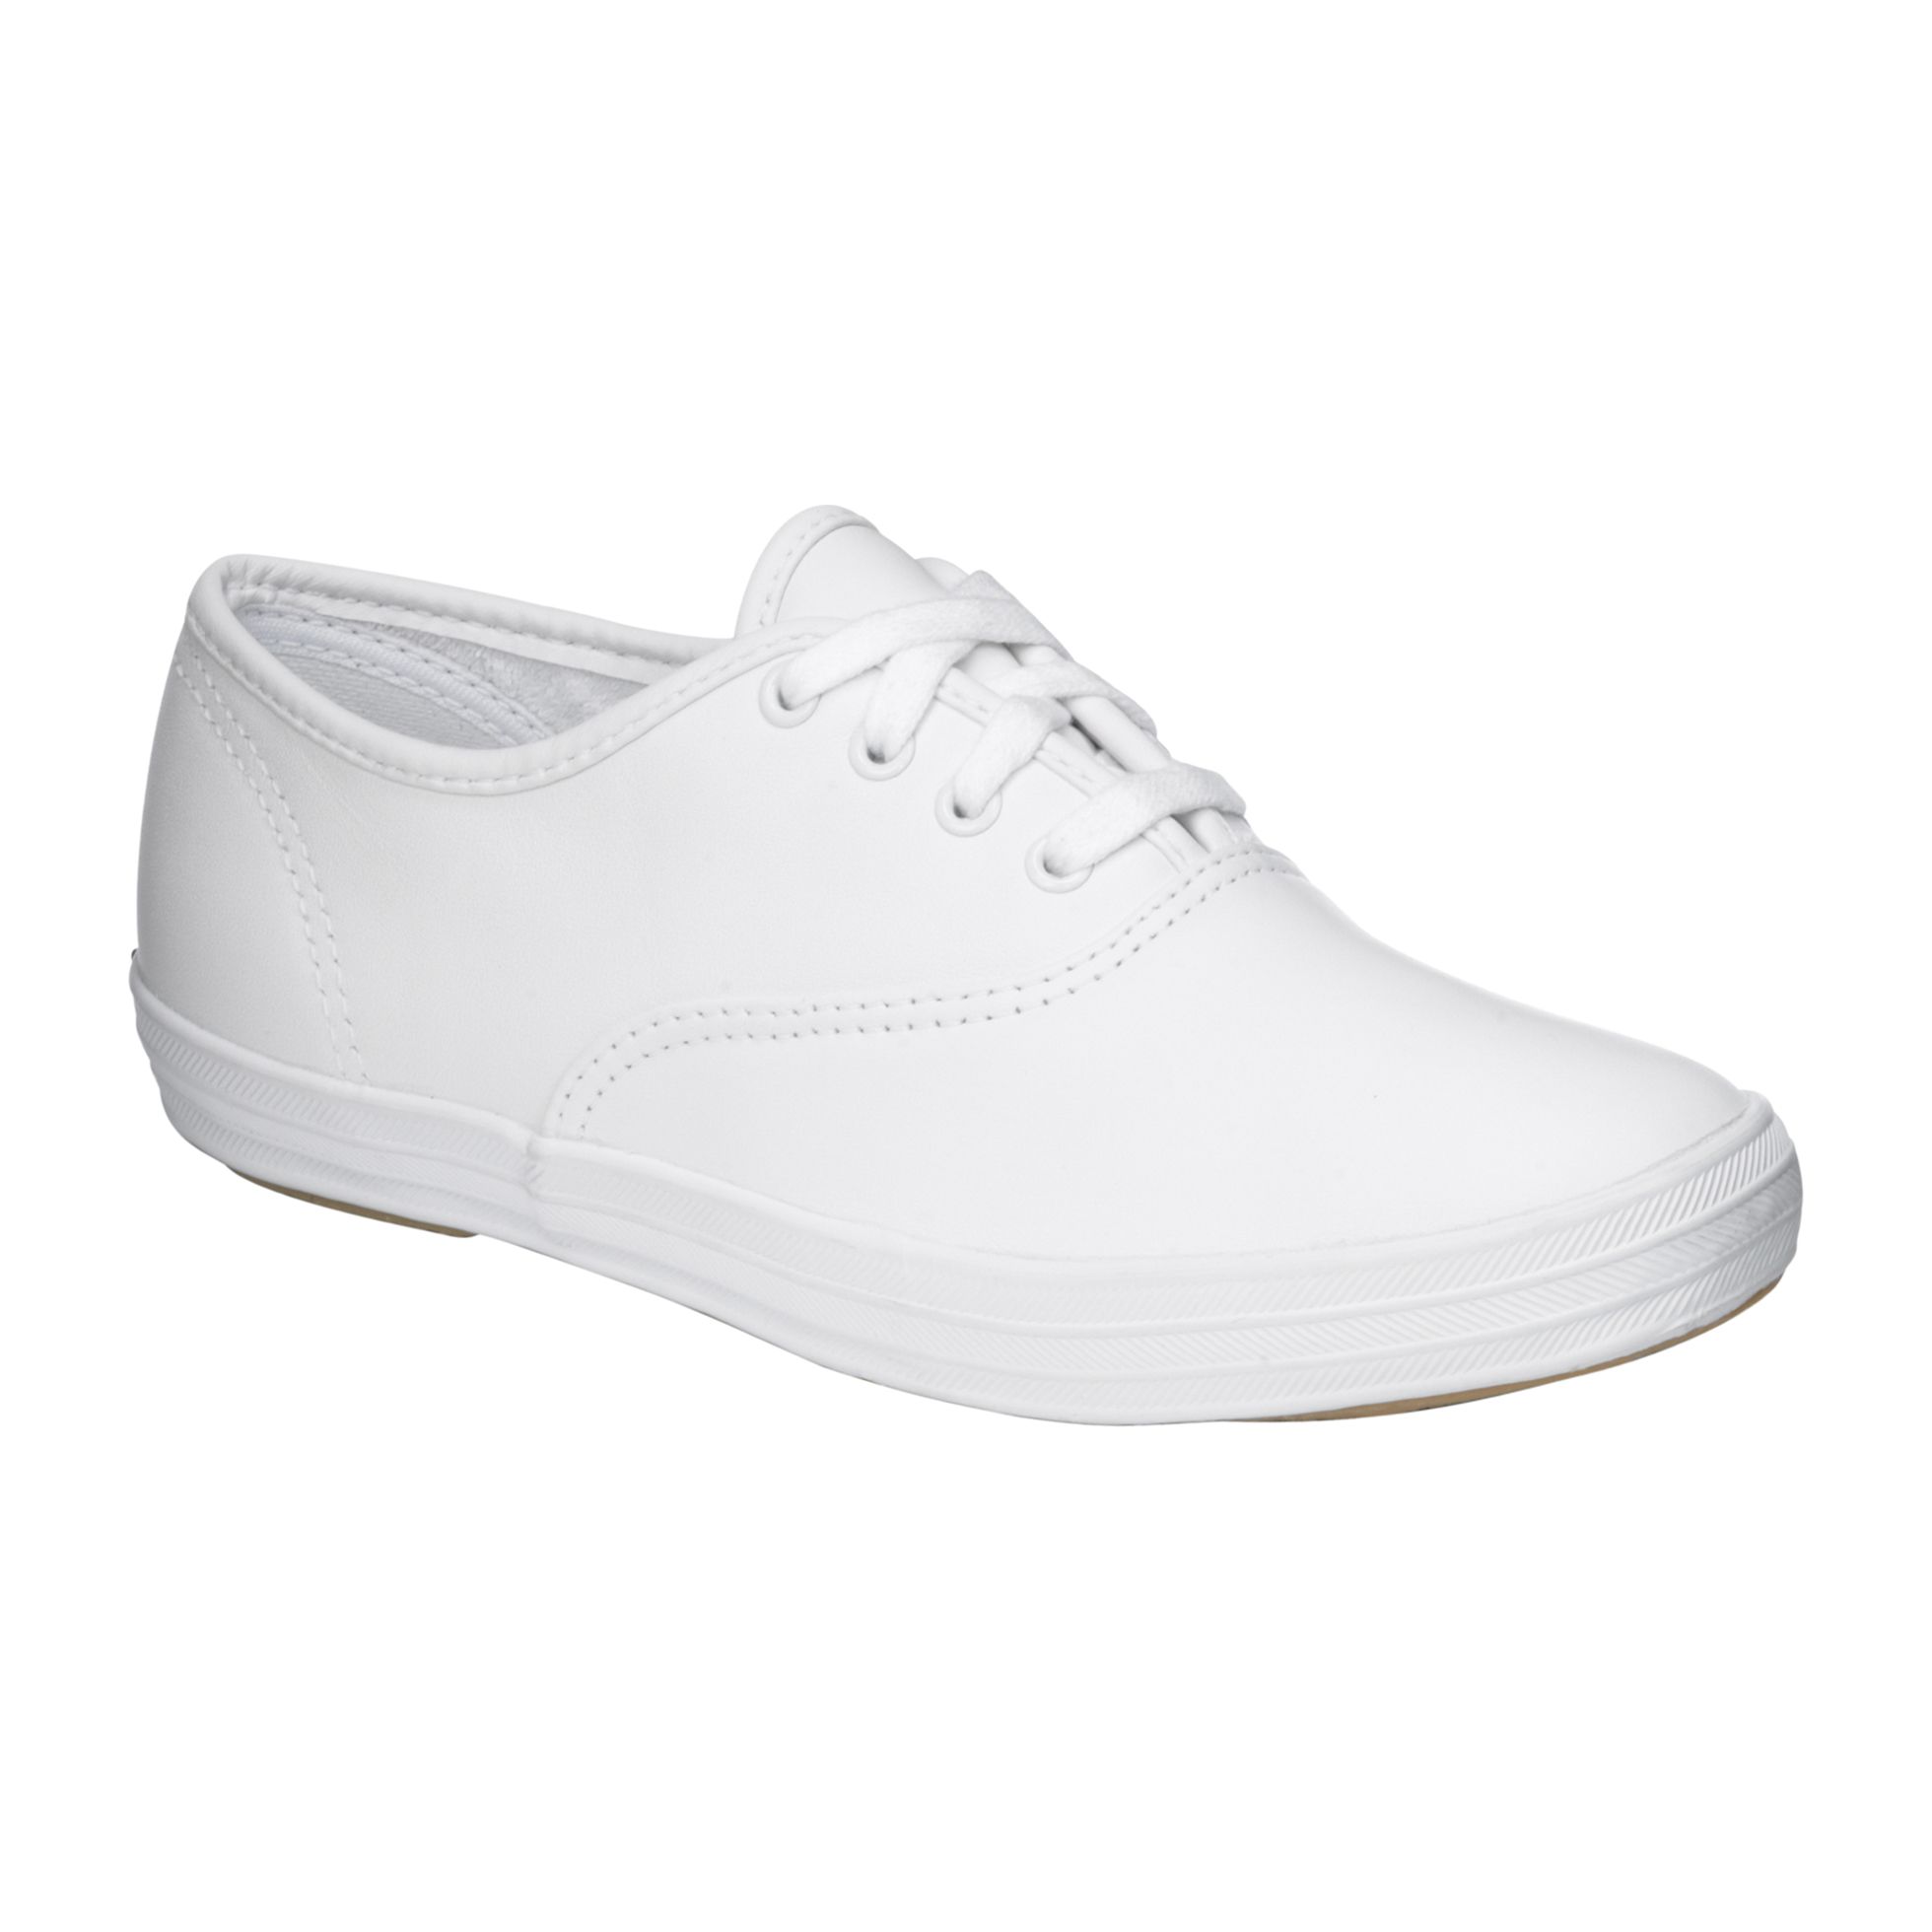 Women's Champion Leather CVO Casual Athletic Shoe - White